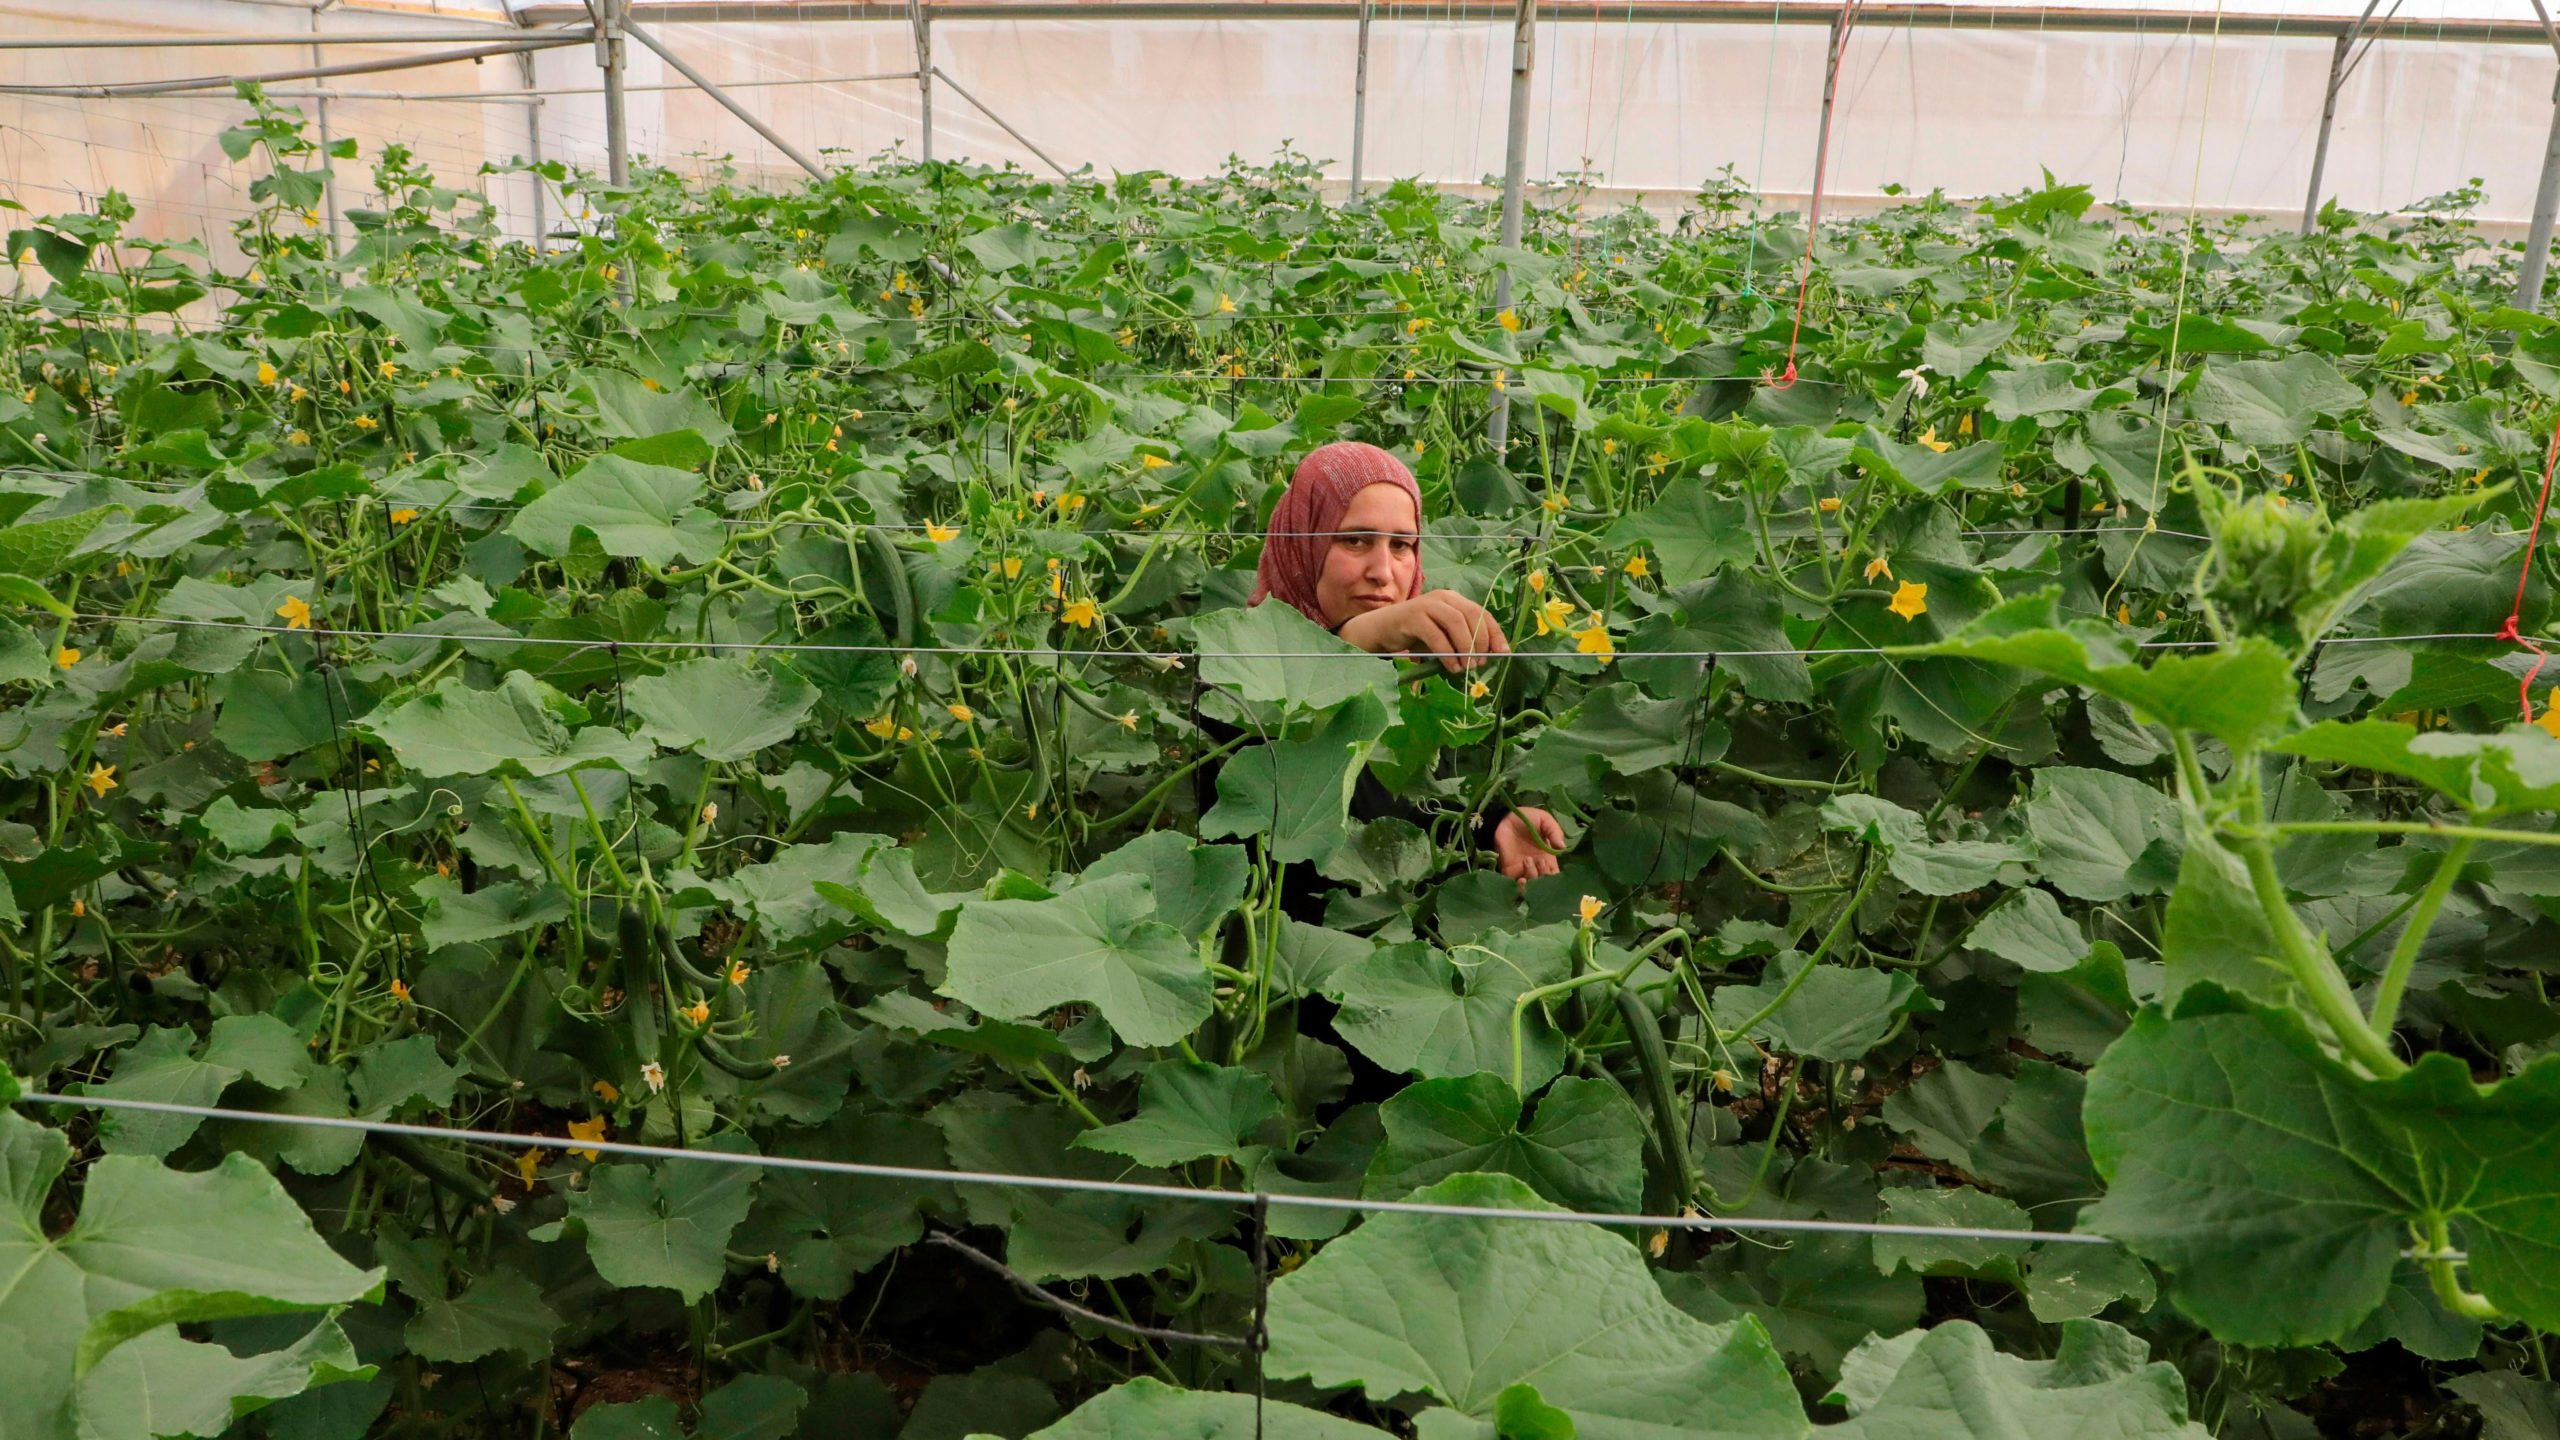 A Palestinian farmer on the West Bank in June 2020. (Photo: HAZEM BADER/AFP, Getty Images)